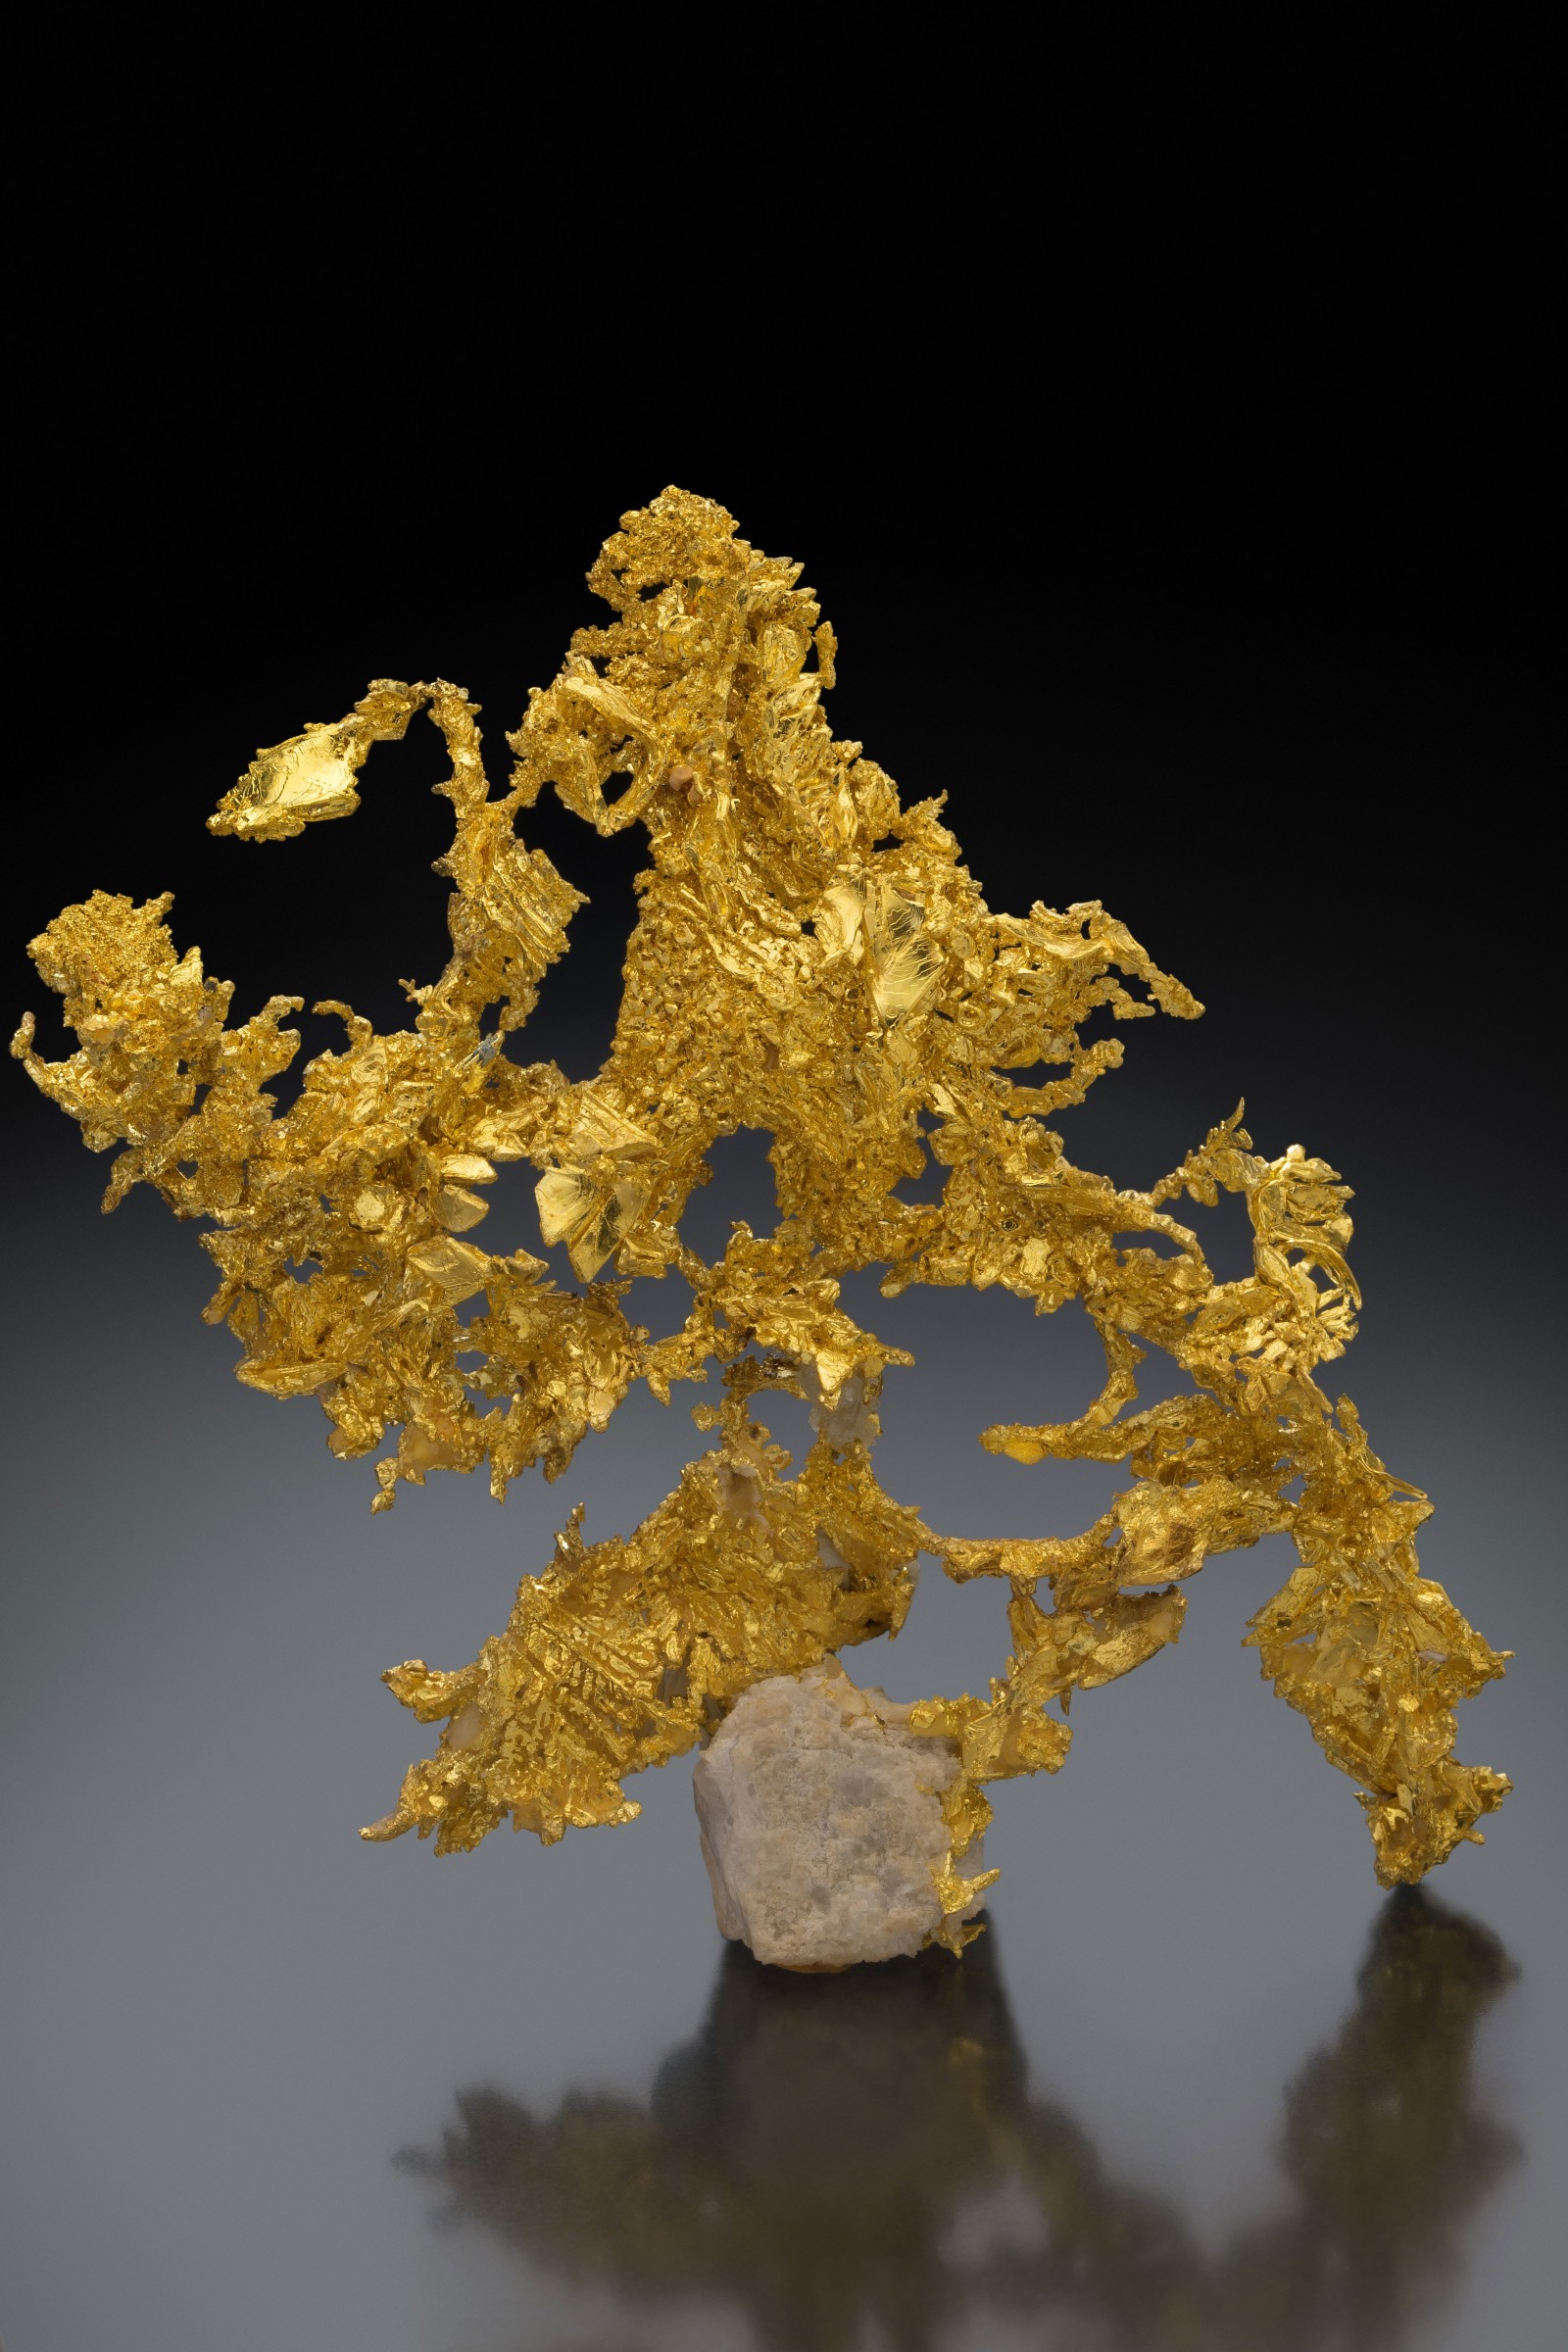 Gold, Eagle&amp;rsquo;s Nest Mine, Placer County, California, USA

Of all the world&amp;rsquo;s minerals, it is unlikely that any have quickened the pulse of humanity, or excited their sense of beauty, more than native gold. This specimen of crystalline gold from the iconic Eagle&amp;rsquo;s Nest Mine in California stands out not only for its astonishing degree of crystallization but for the aesthetic shape that nature wrought as it crystallized.